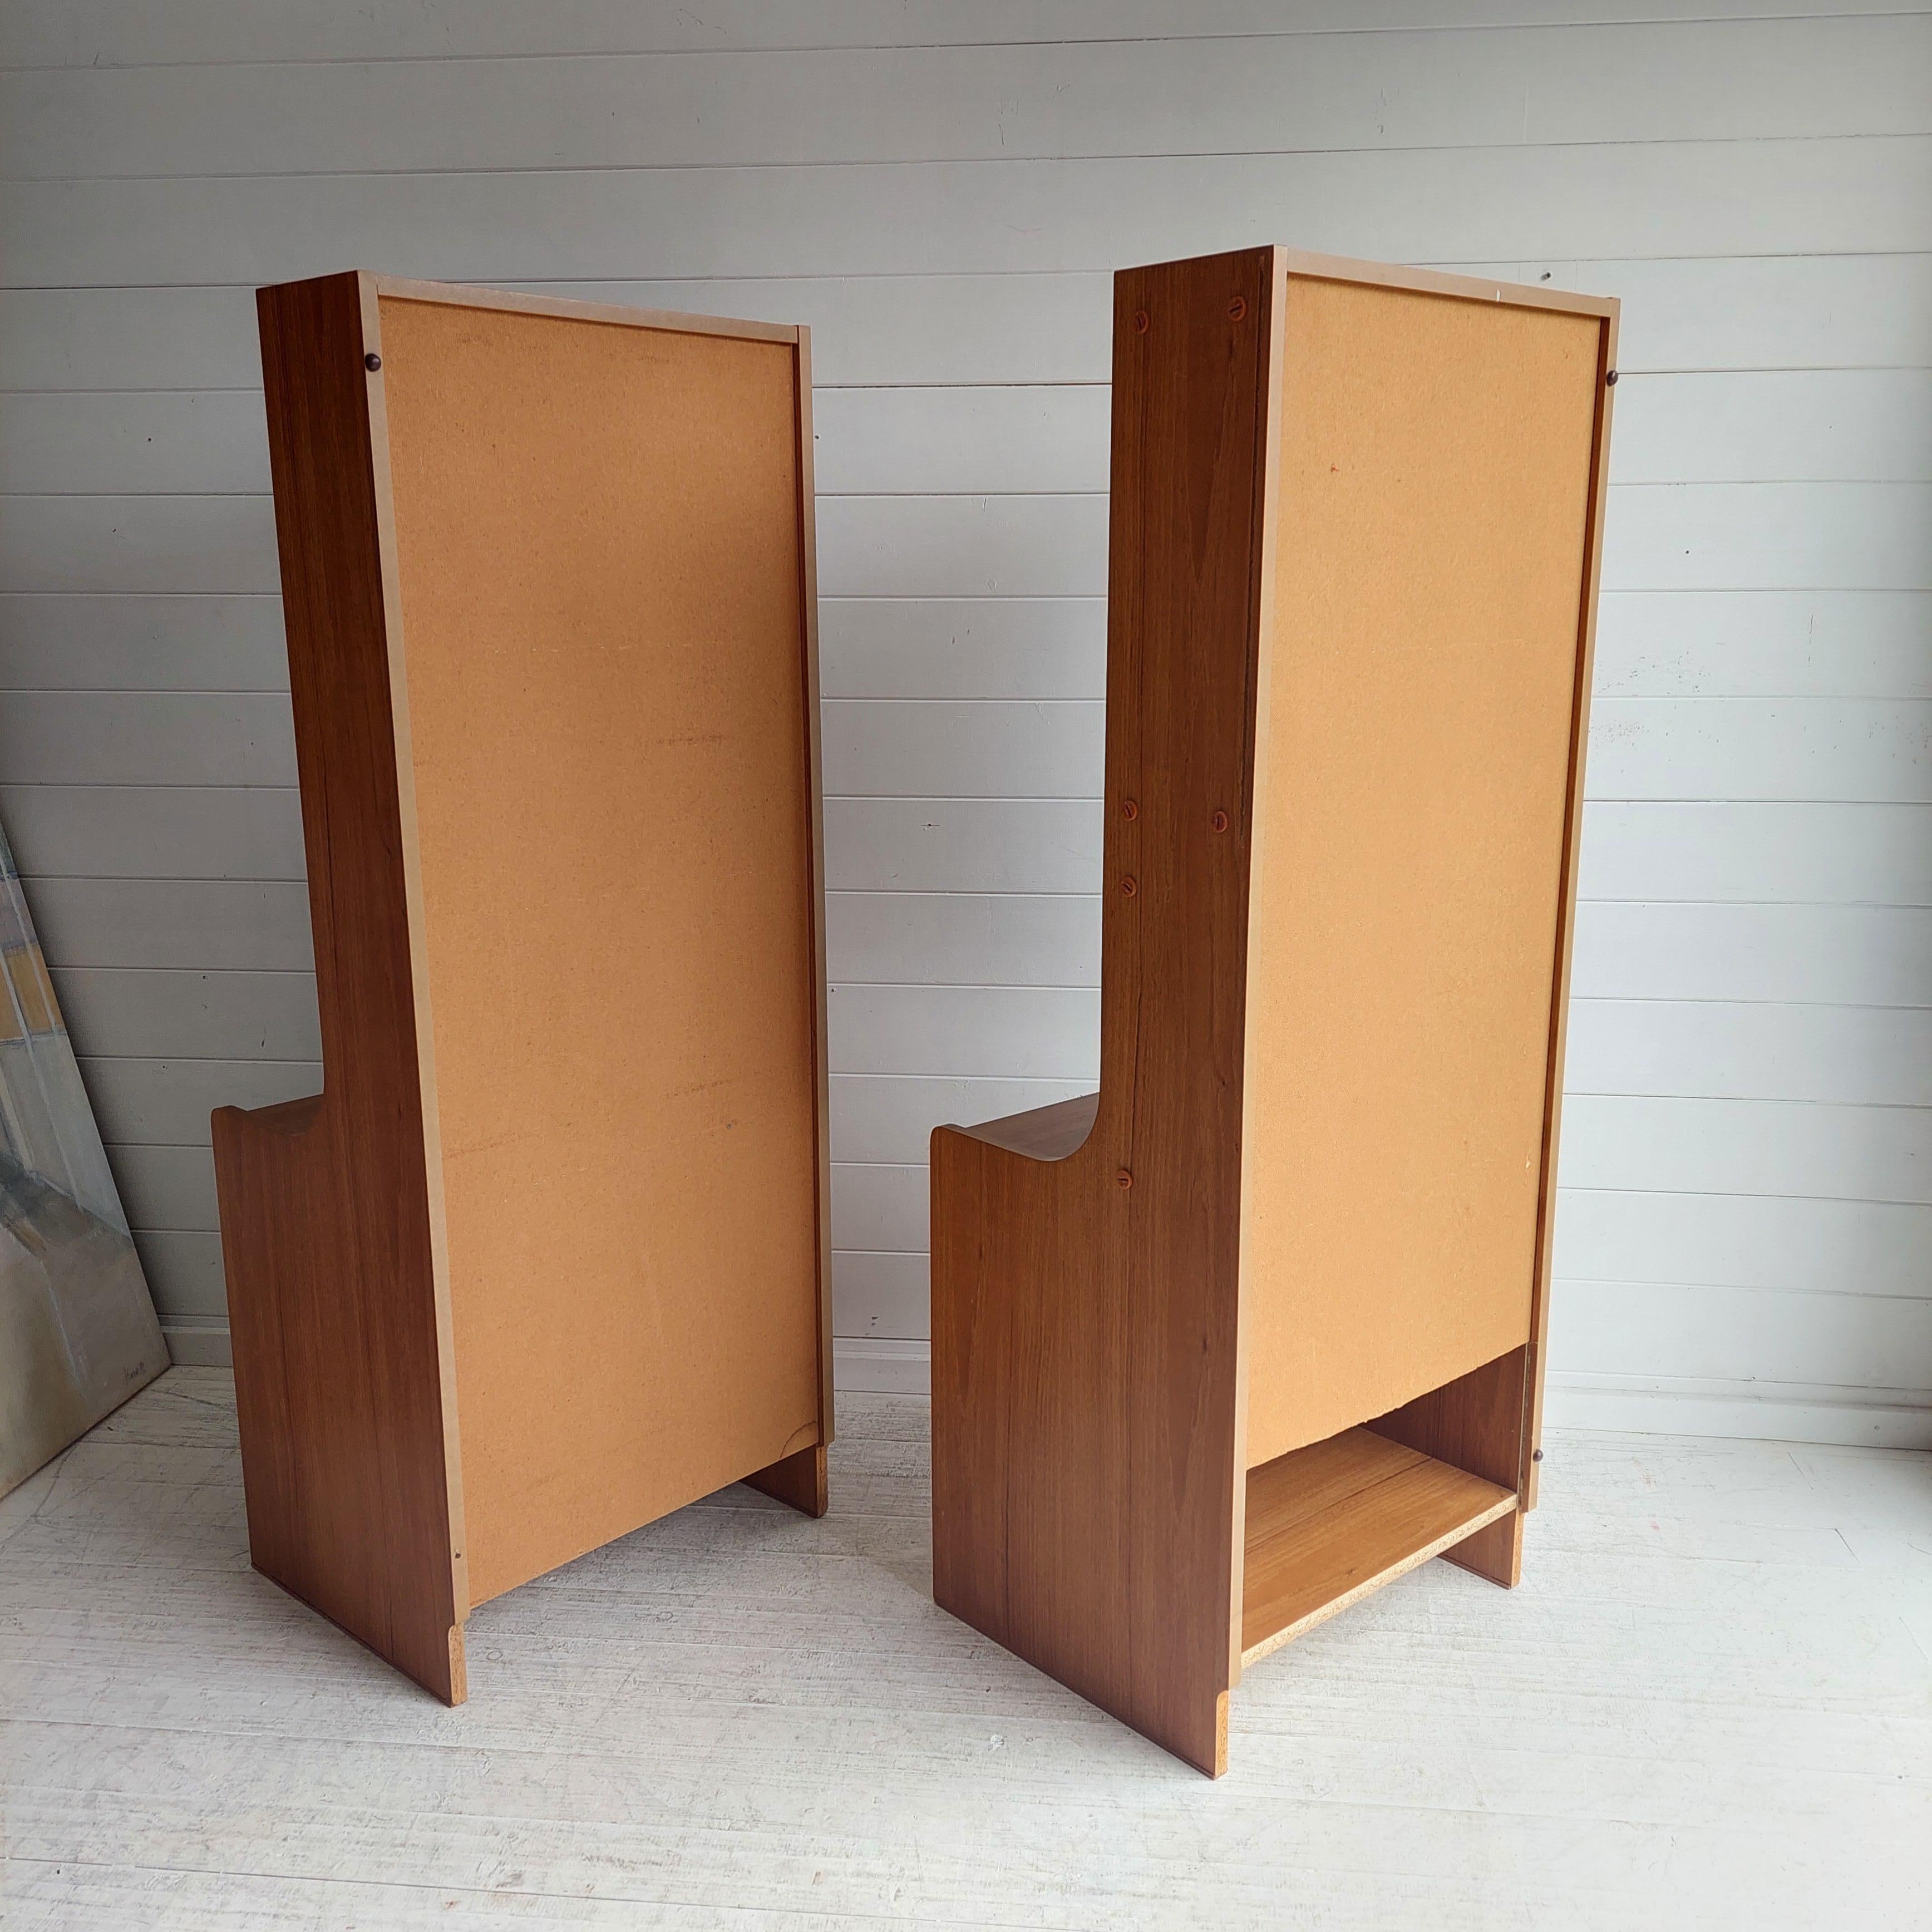 Mid Century Pair of Teak effect Bedside Tables shelving units by Schreiber, 70s For Sale 8